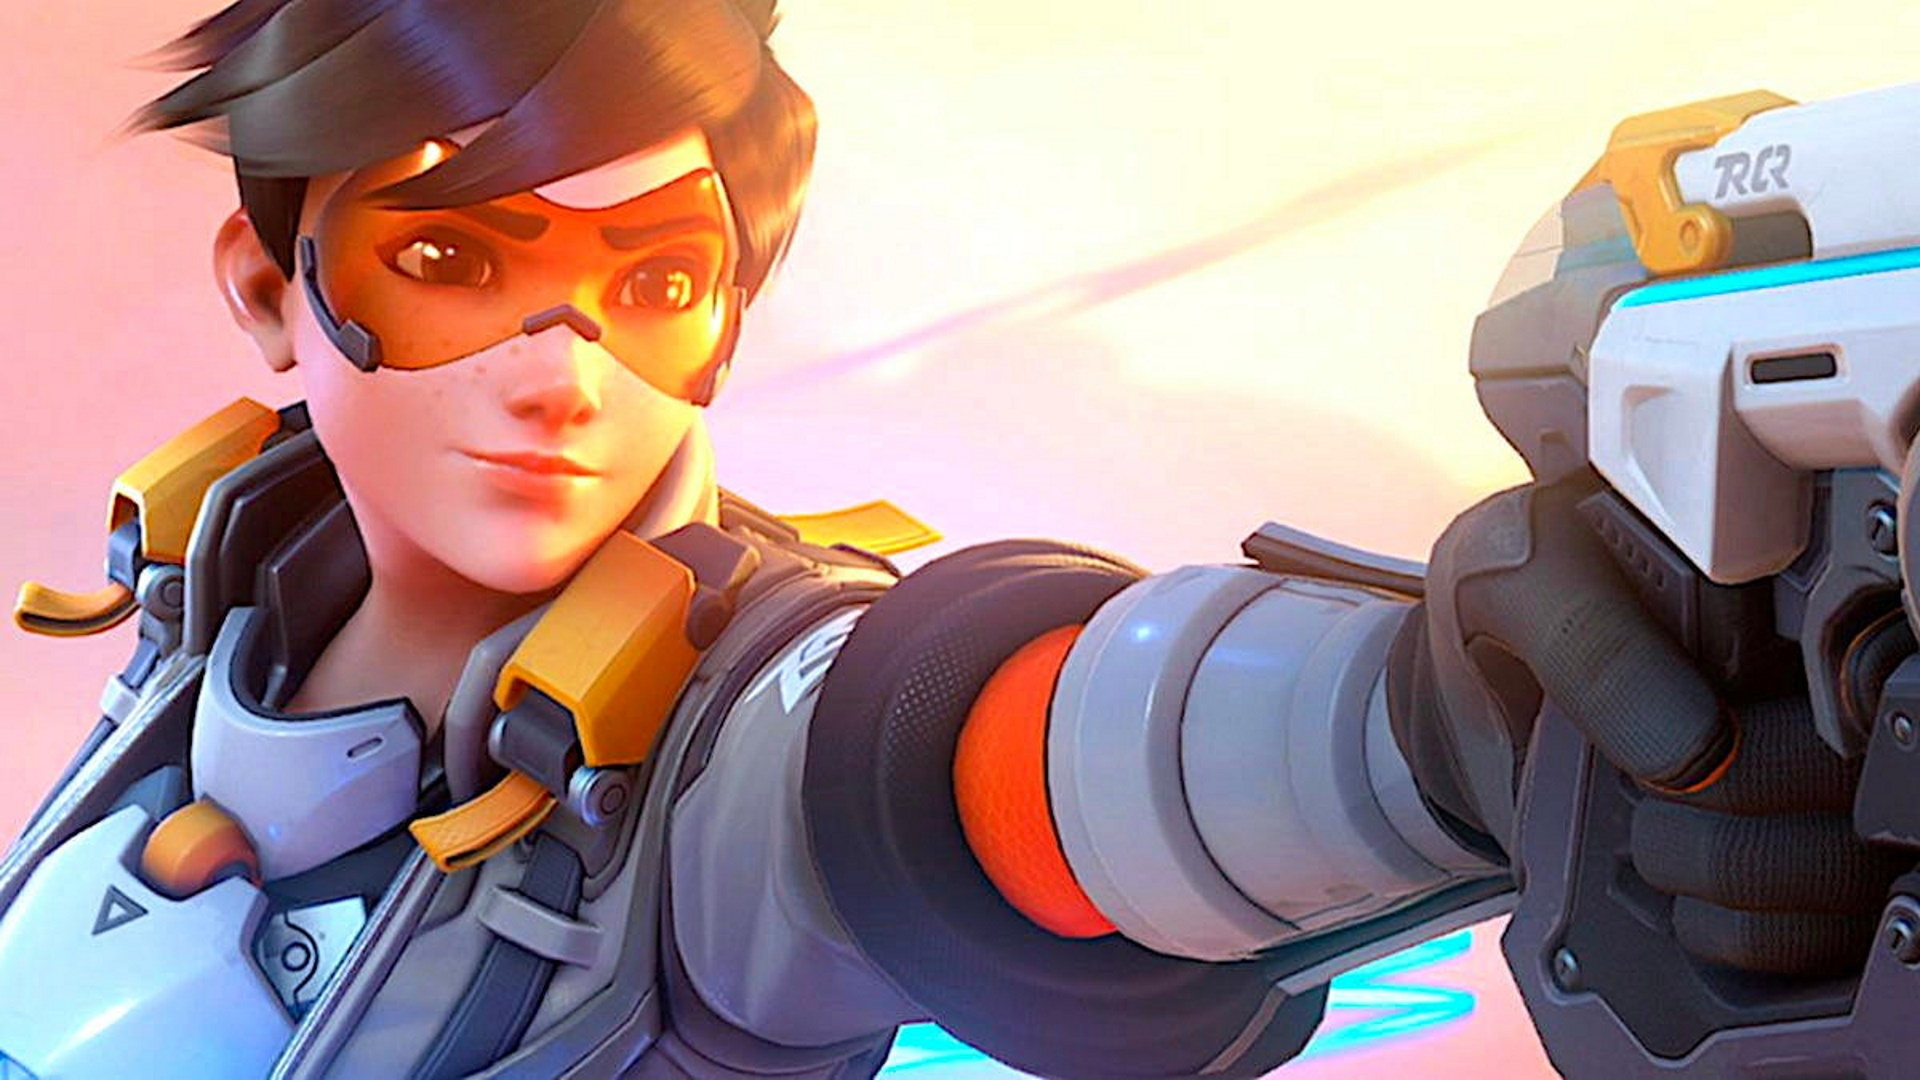 Characters of Overwatch Video game Tracer, overwatch character